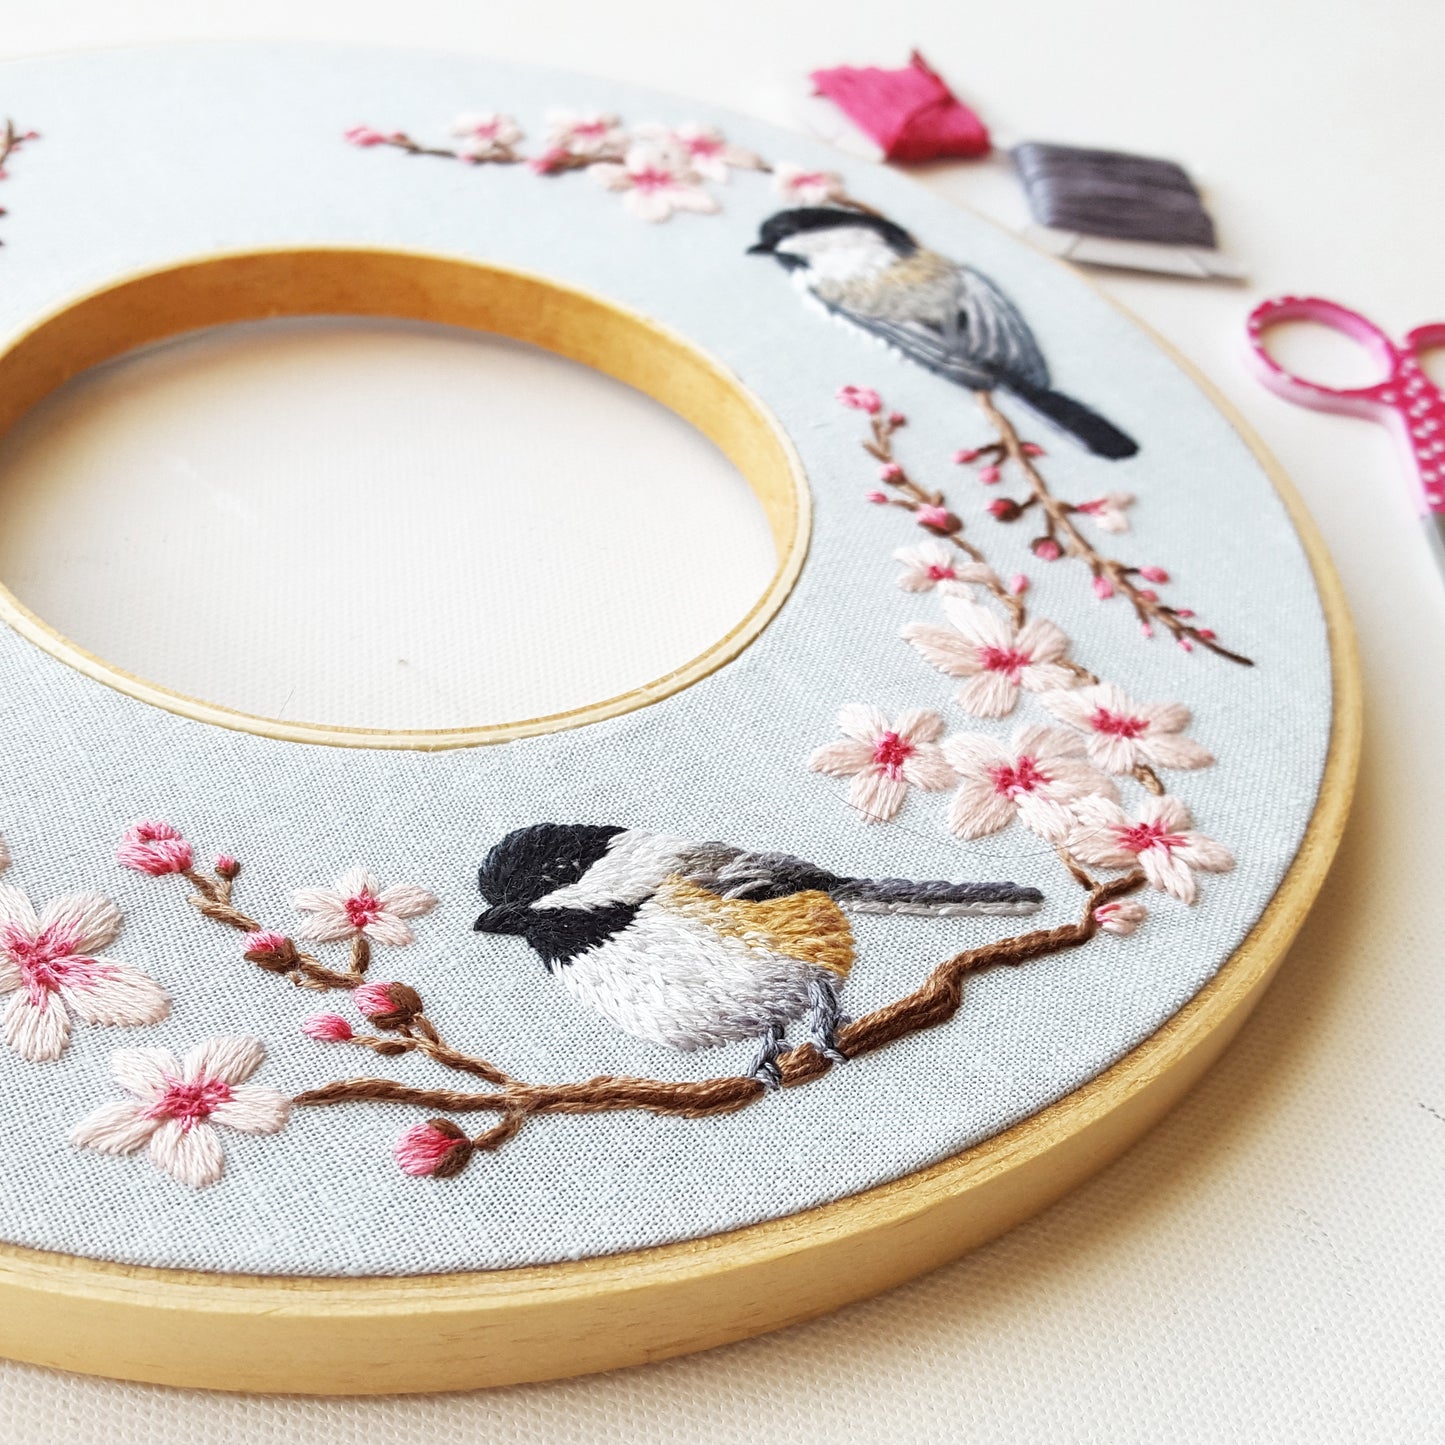 Spring Wreath Embroidery Kit